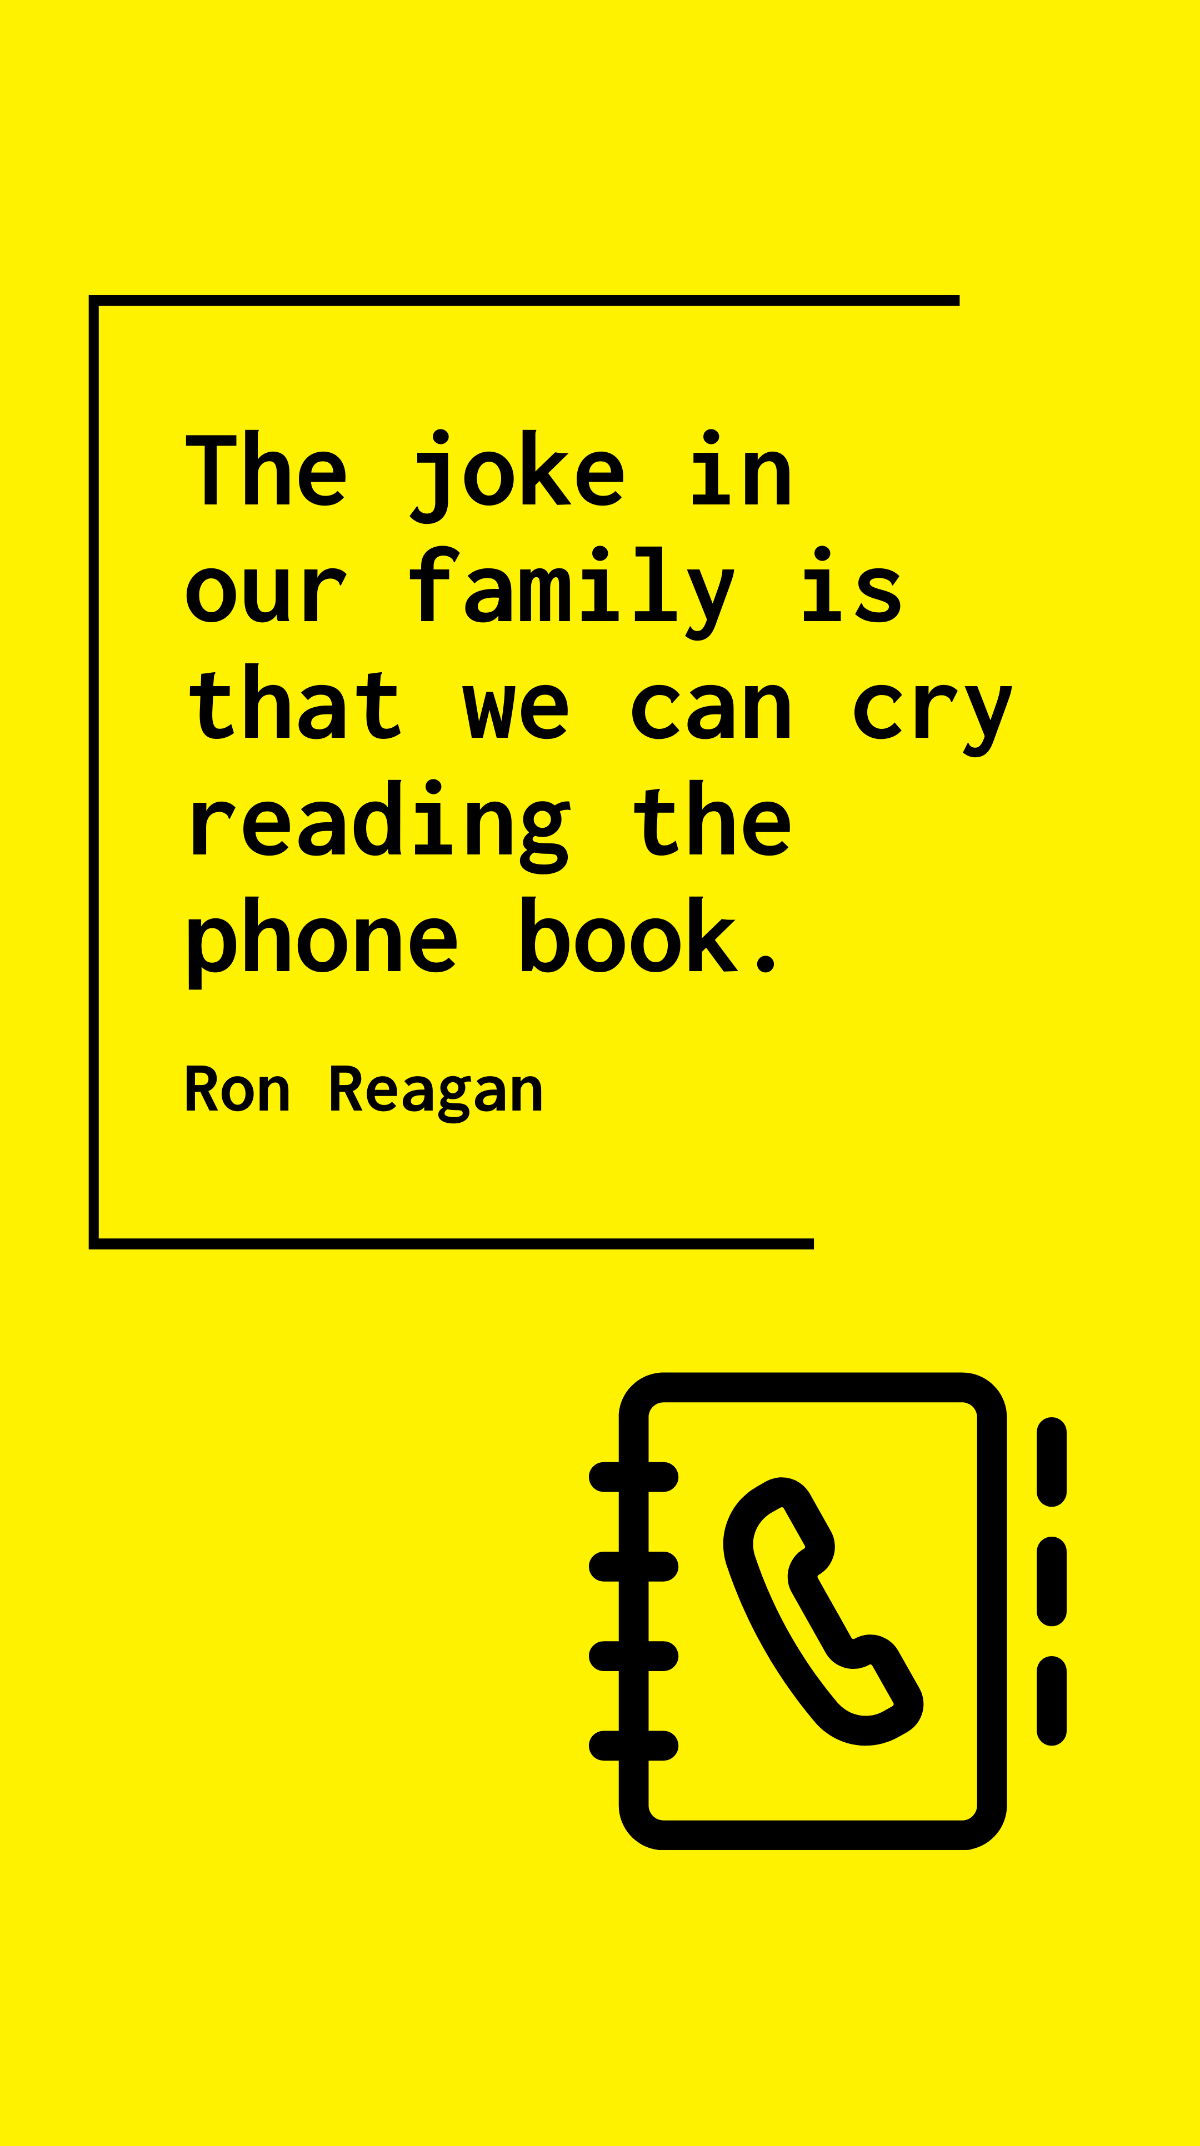 Free Ron Reagan - The joke in our family is that we can cry reading the phone book. Template